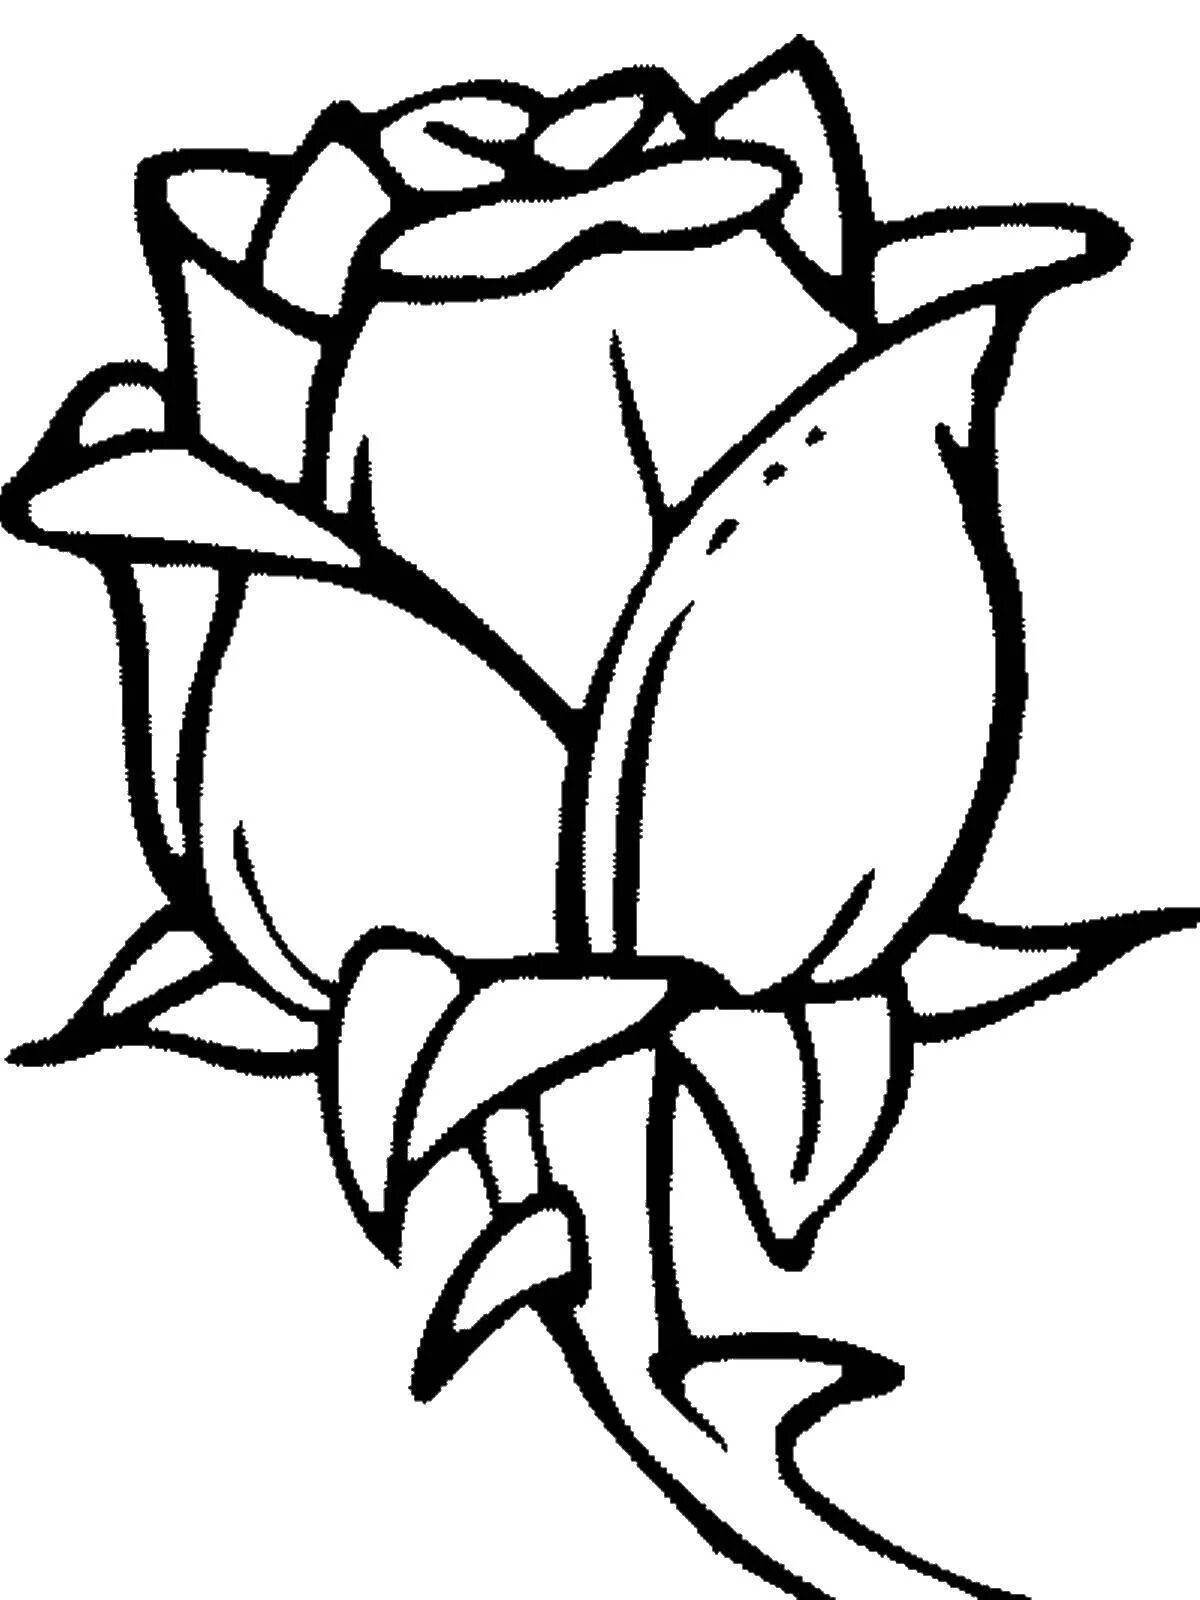 Coloring page gentle rose